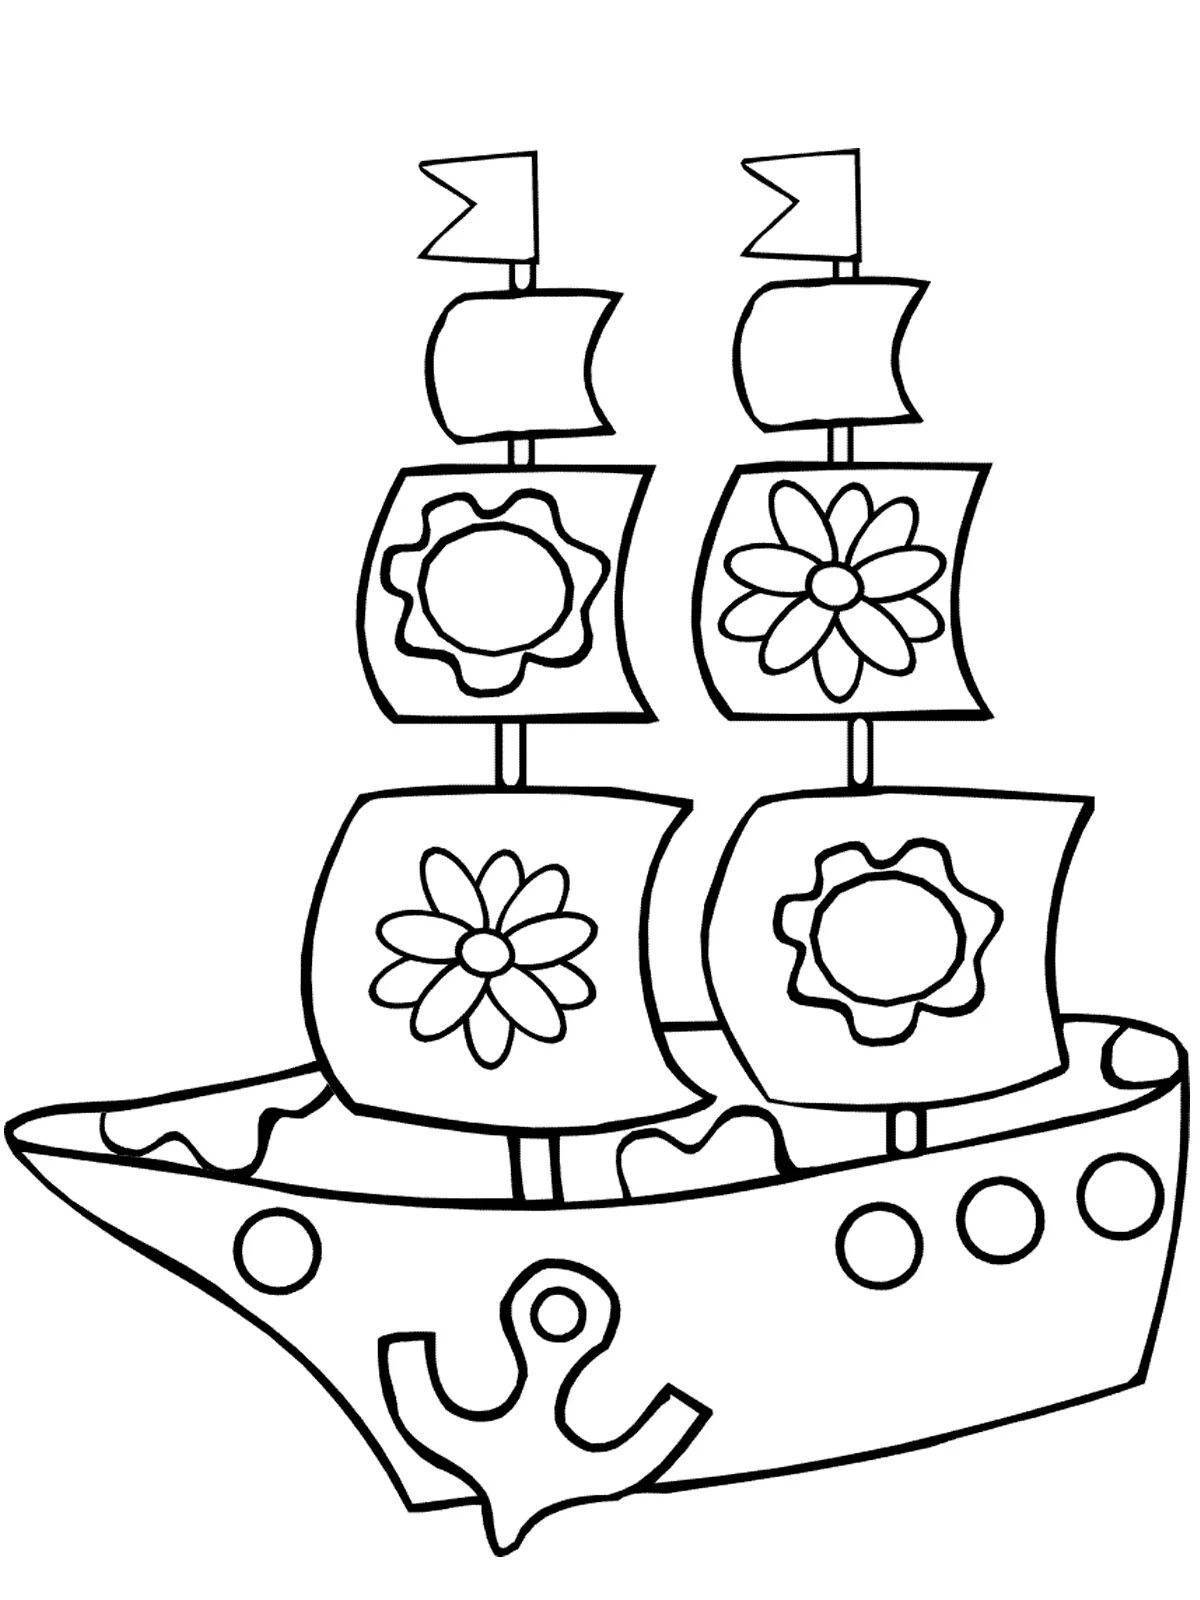 Happy ship coloring book for 5-6 year olds